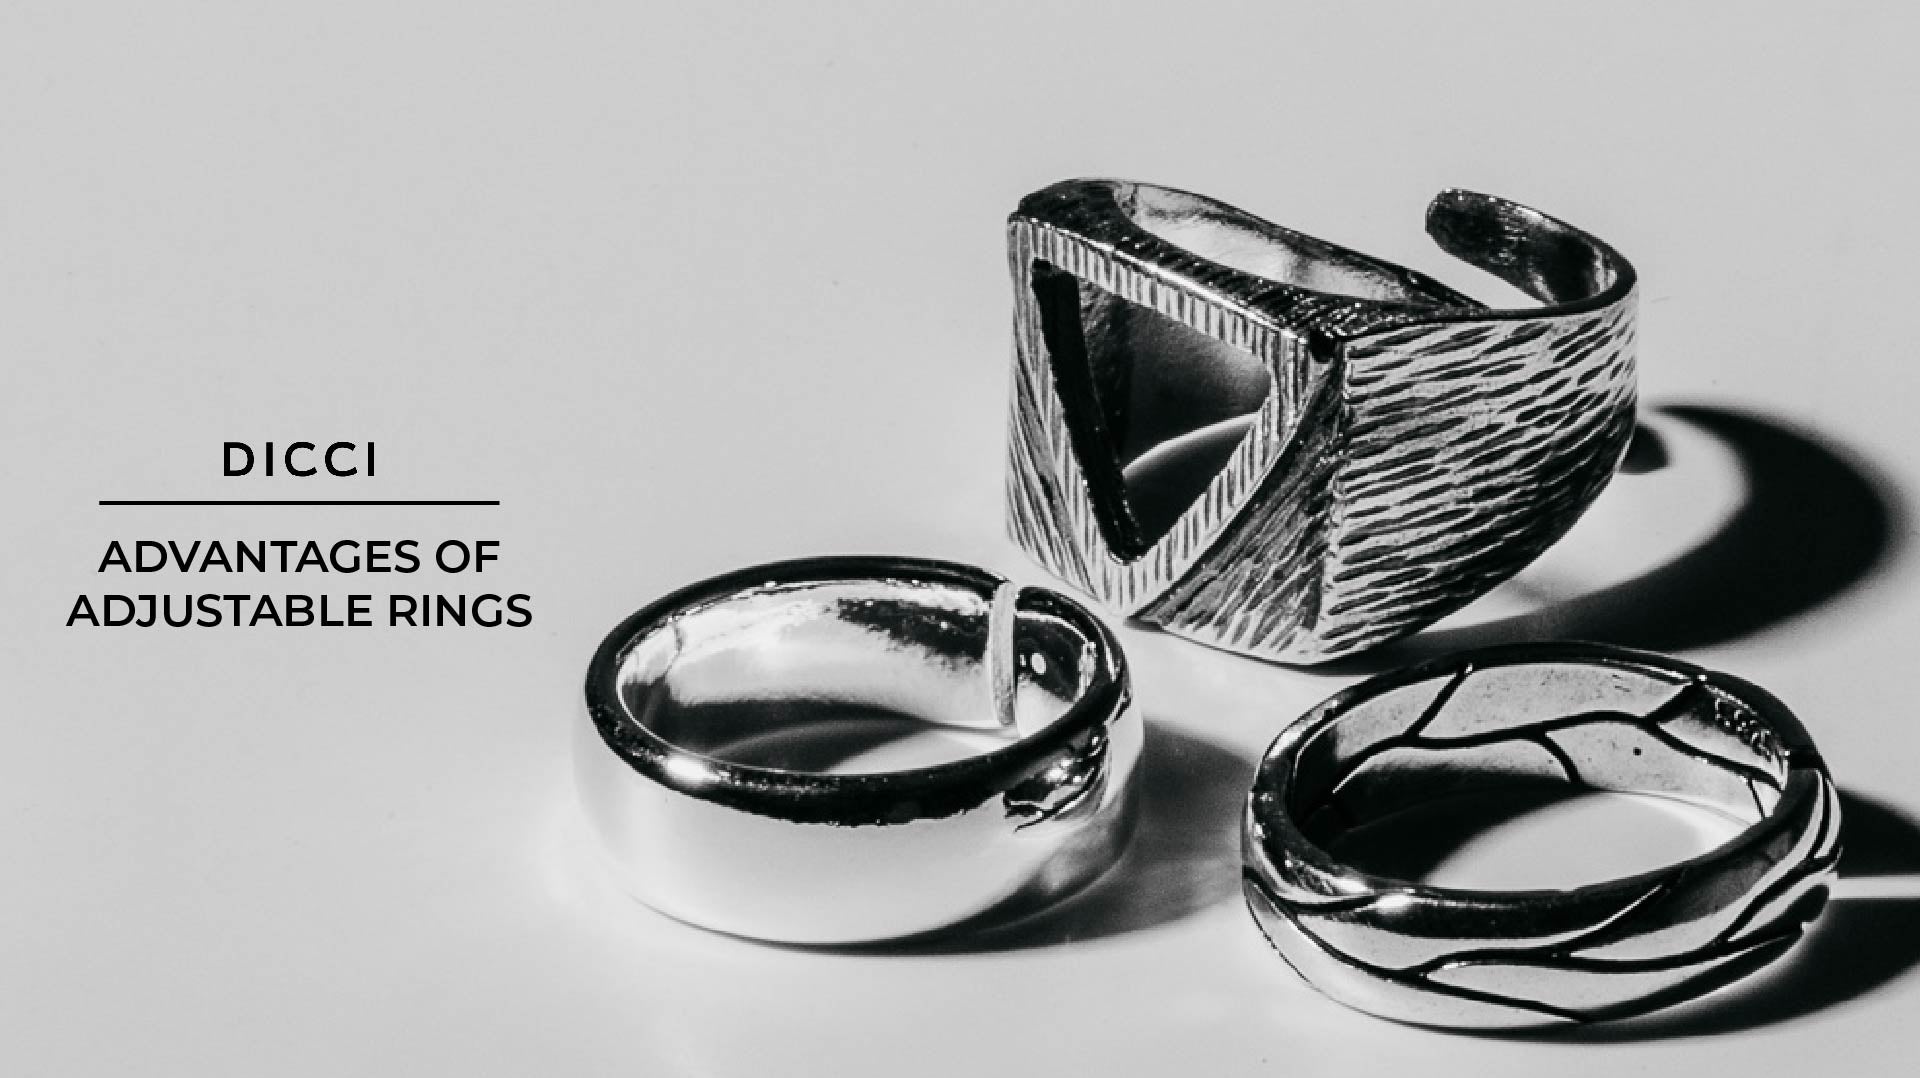 ADVANTAGES OF ADJUSTABLE RINGS